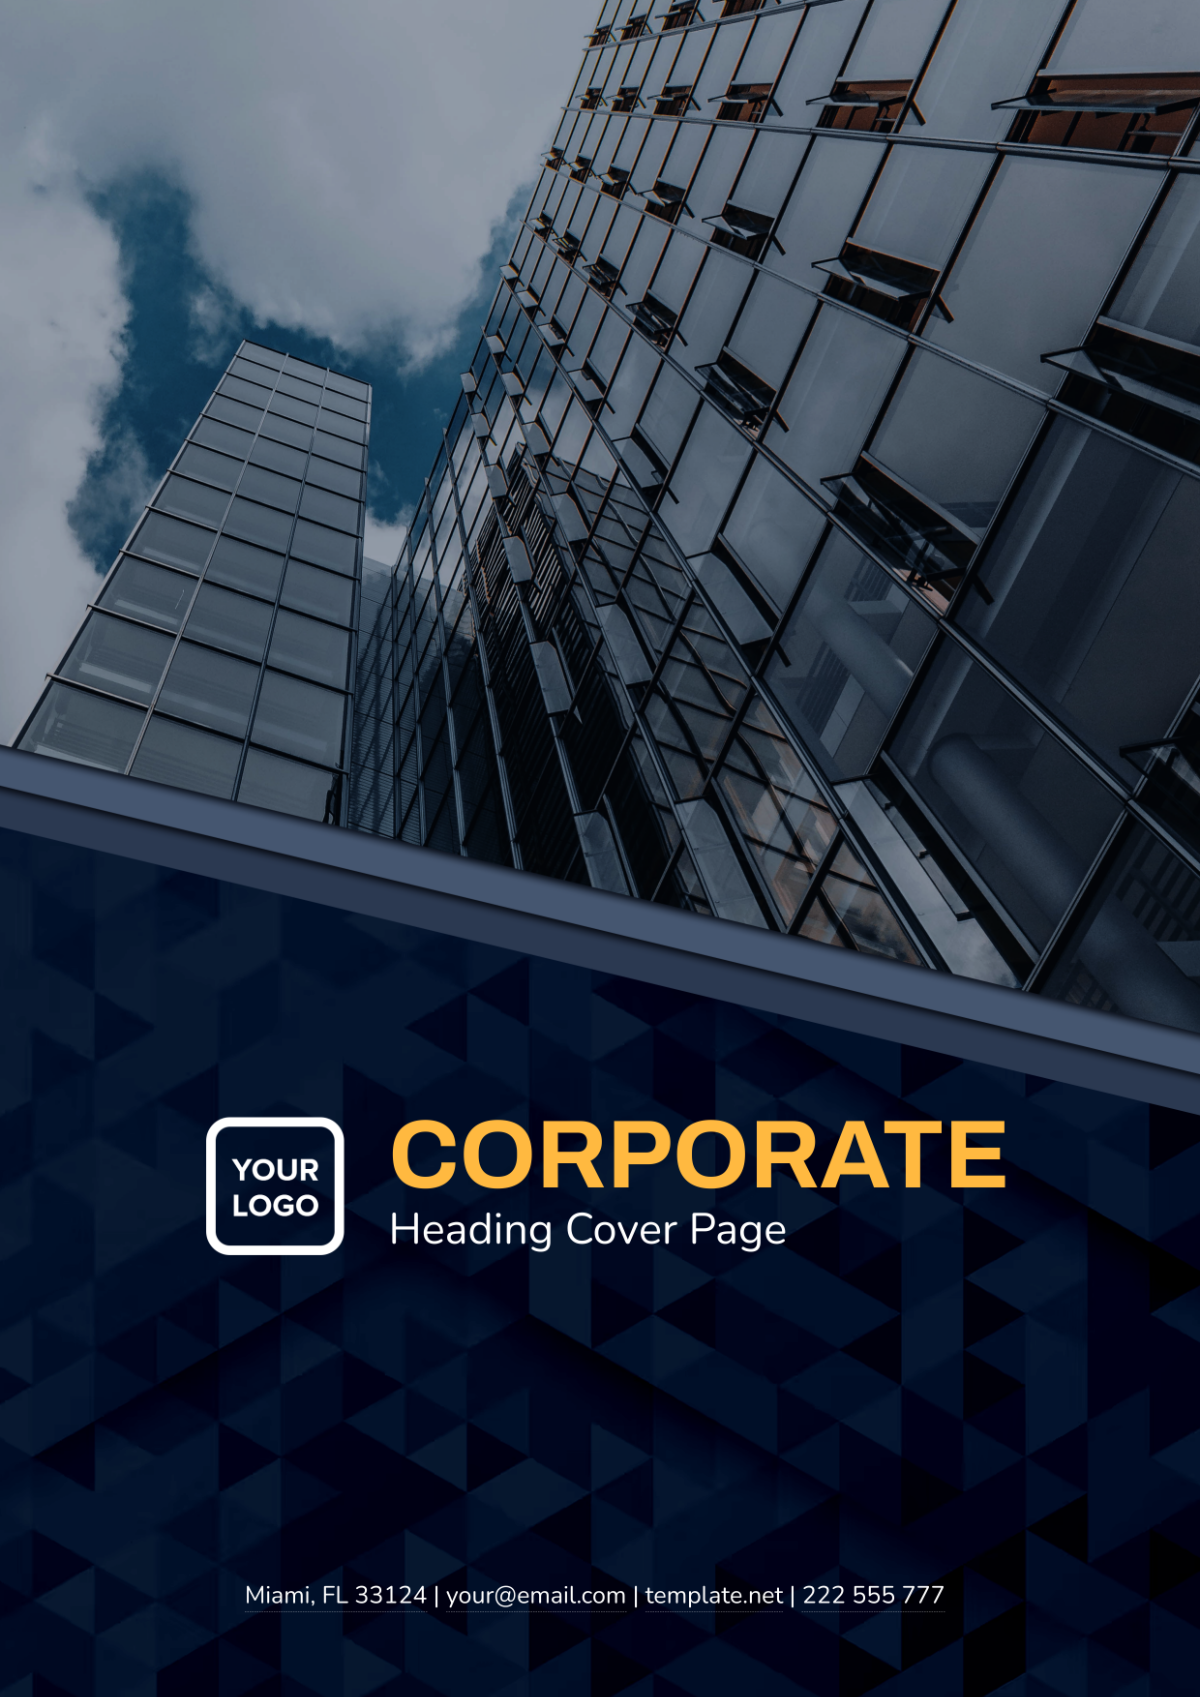 Corporate Heading Cover Page